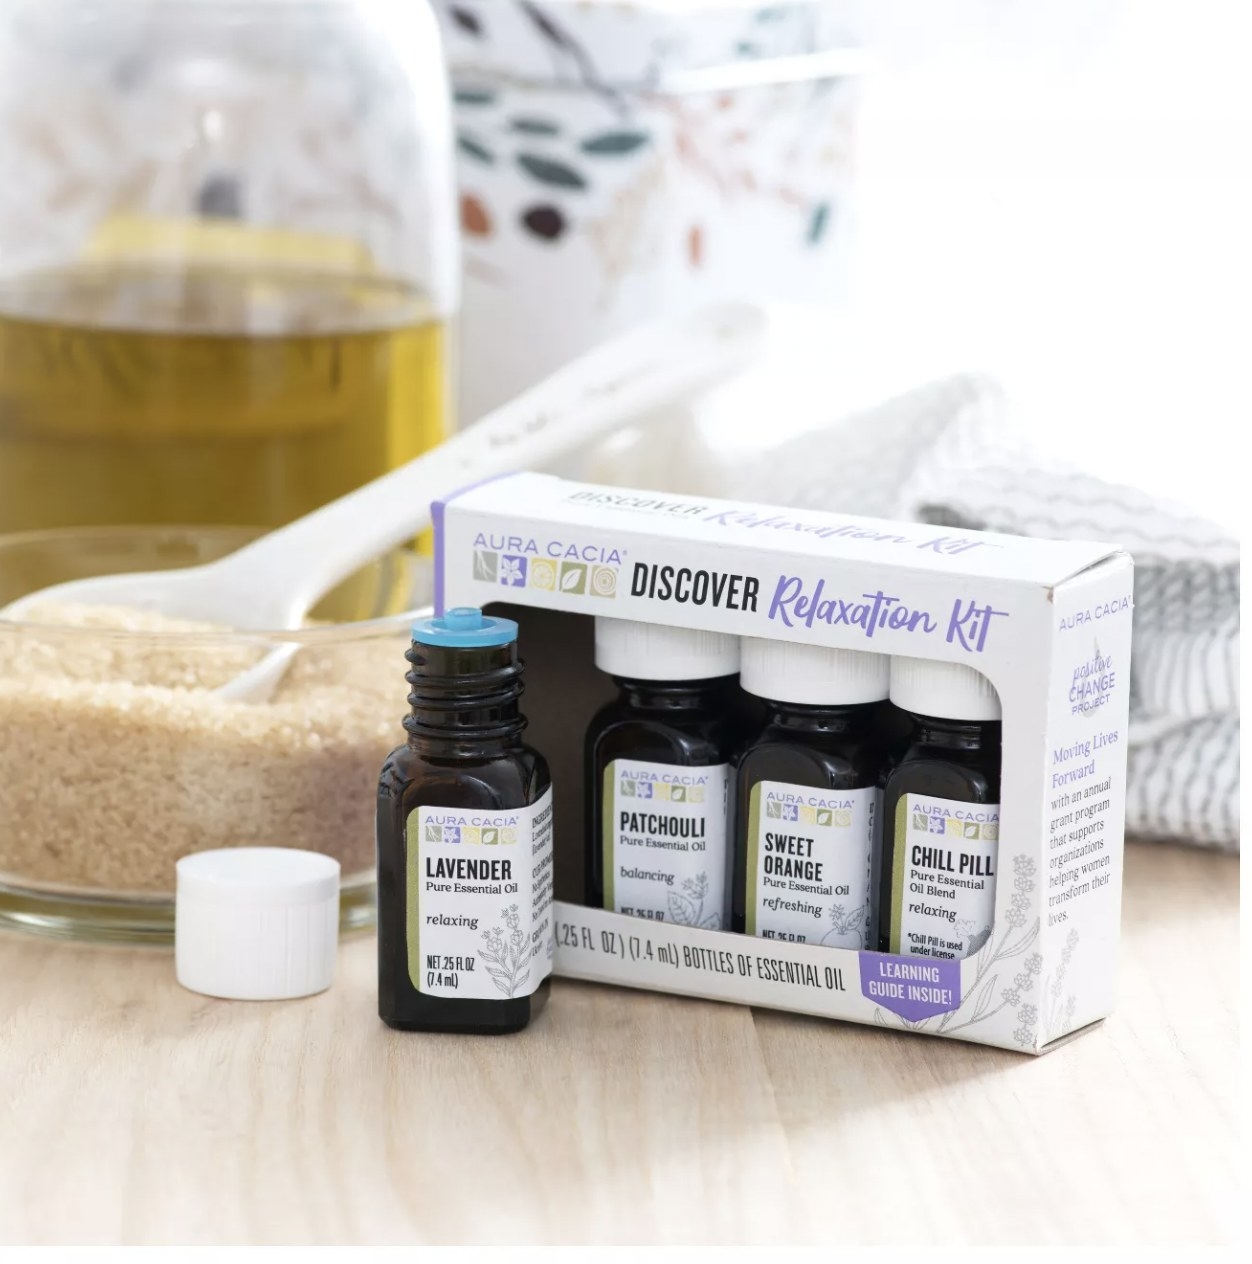 The essential oil pack